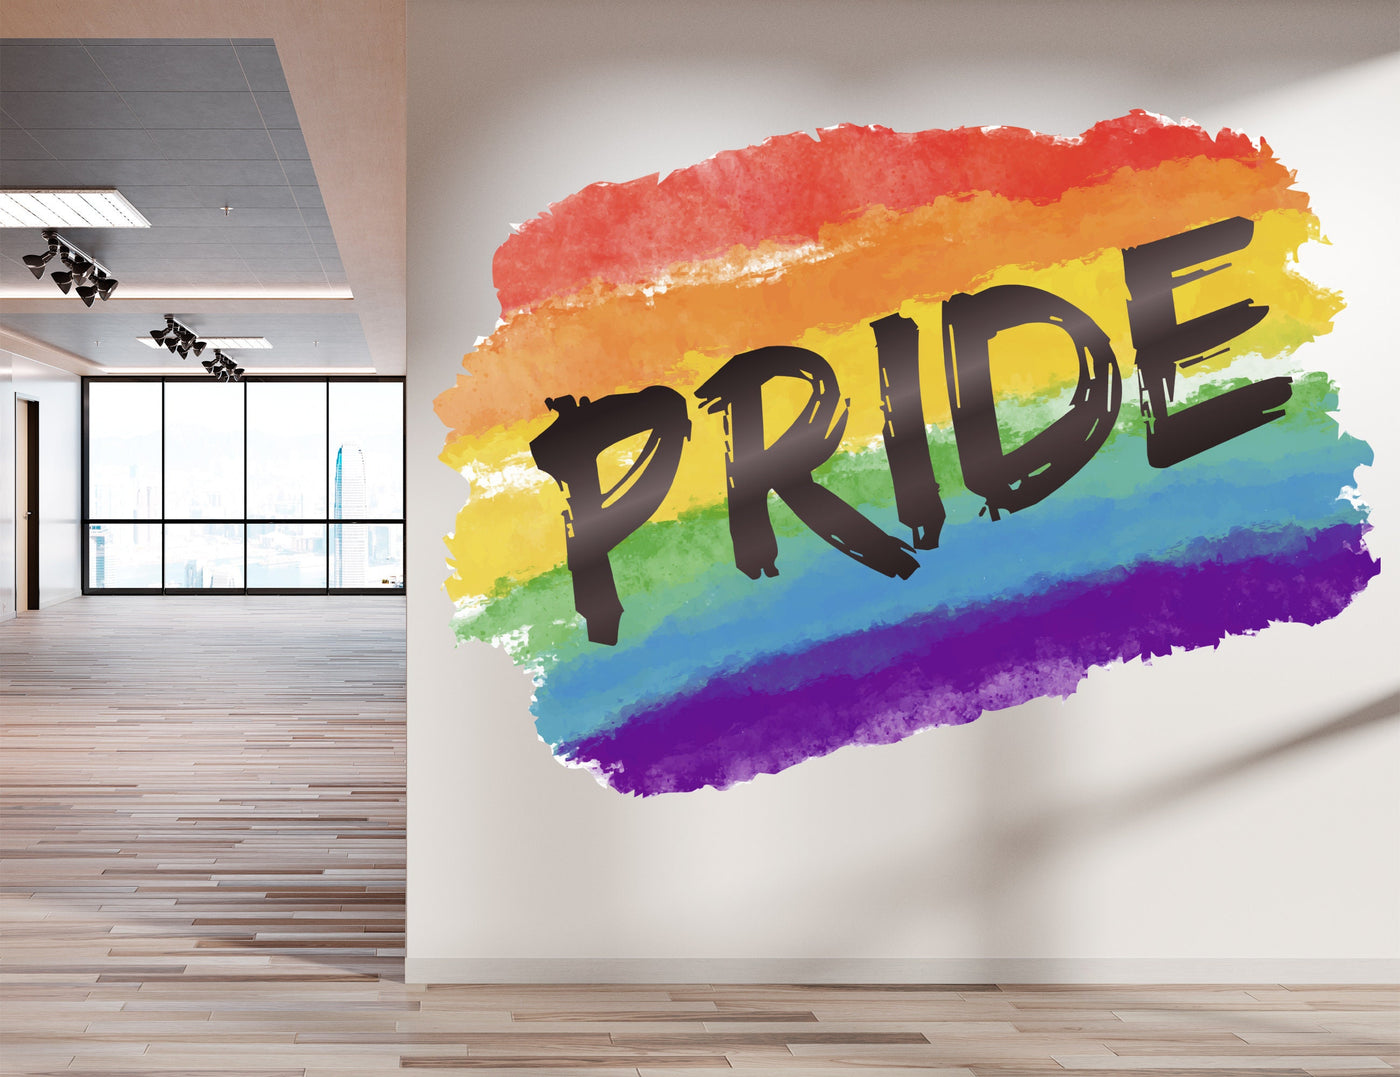 Pride Wall Decal Decor for Dorm room - Watercolor Rainbow Stickers for Room Decor - LGBT Pride Decal for Office- Pride Month Decor for Patio